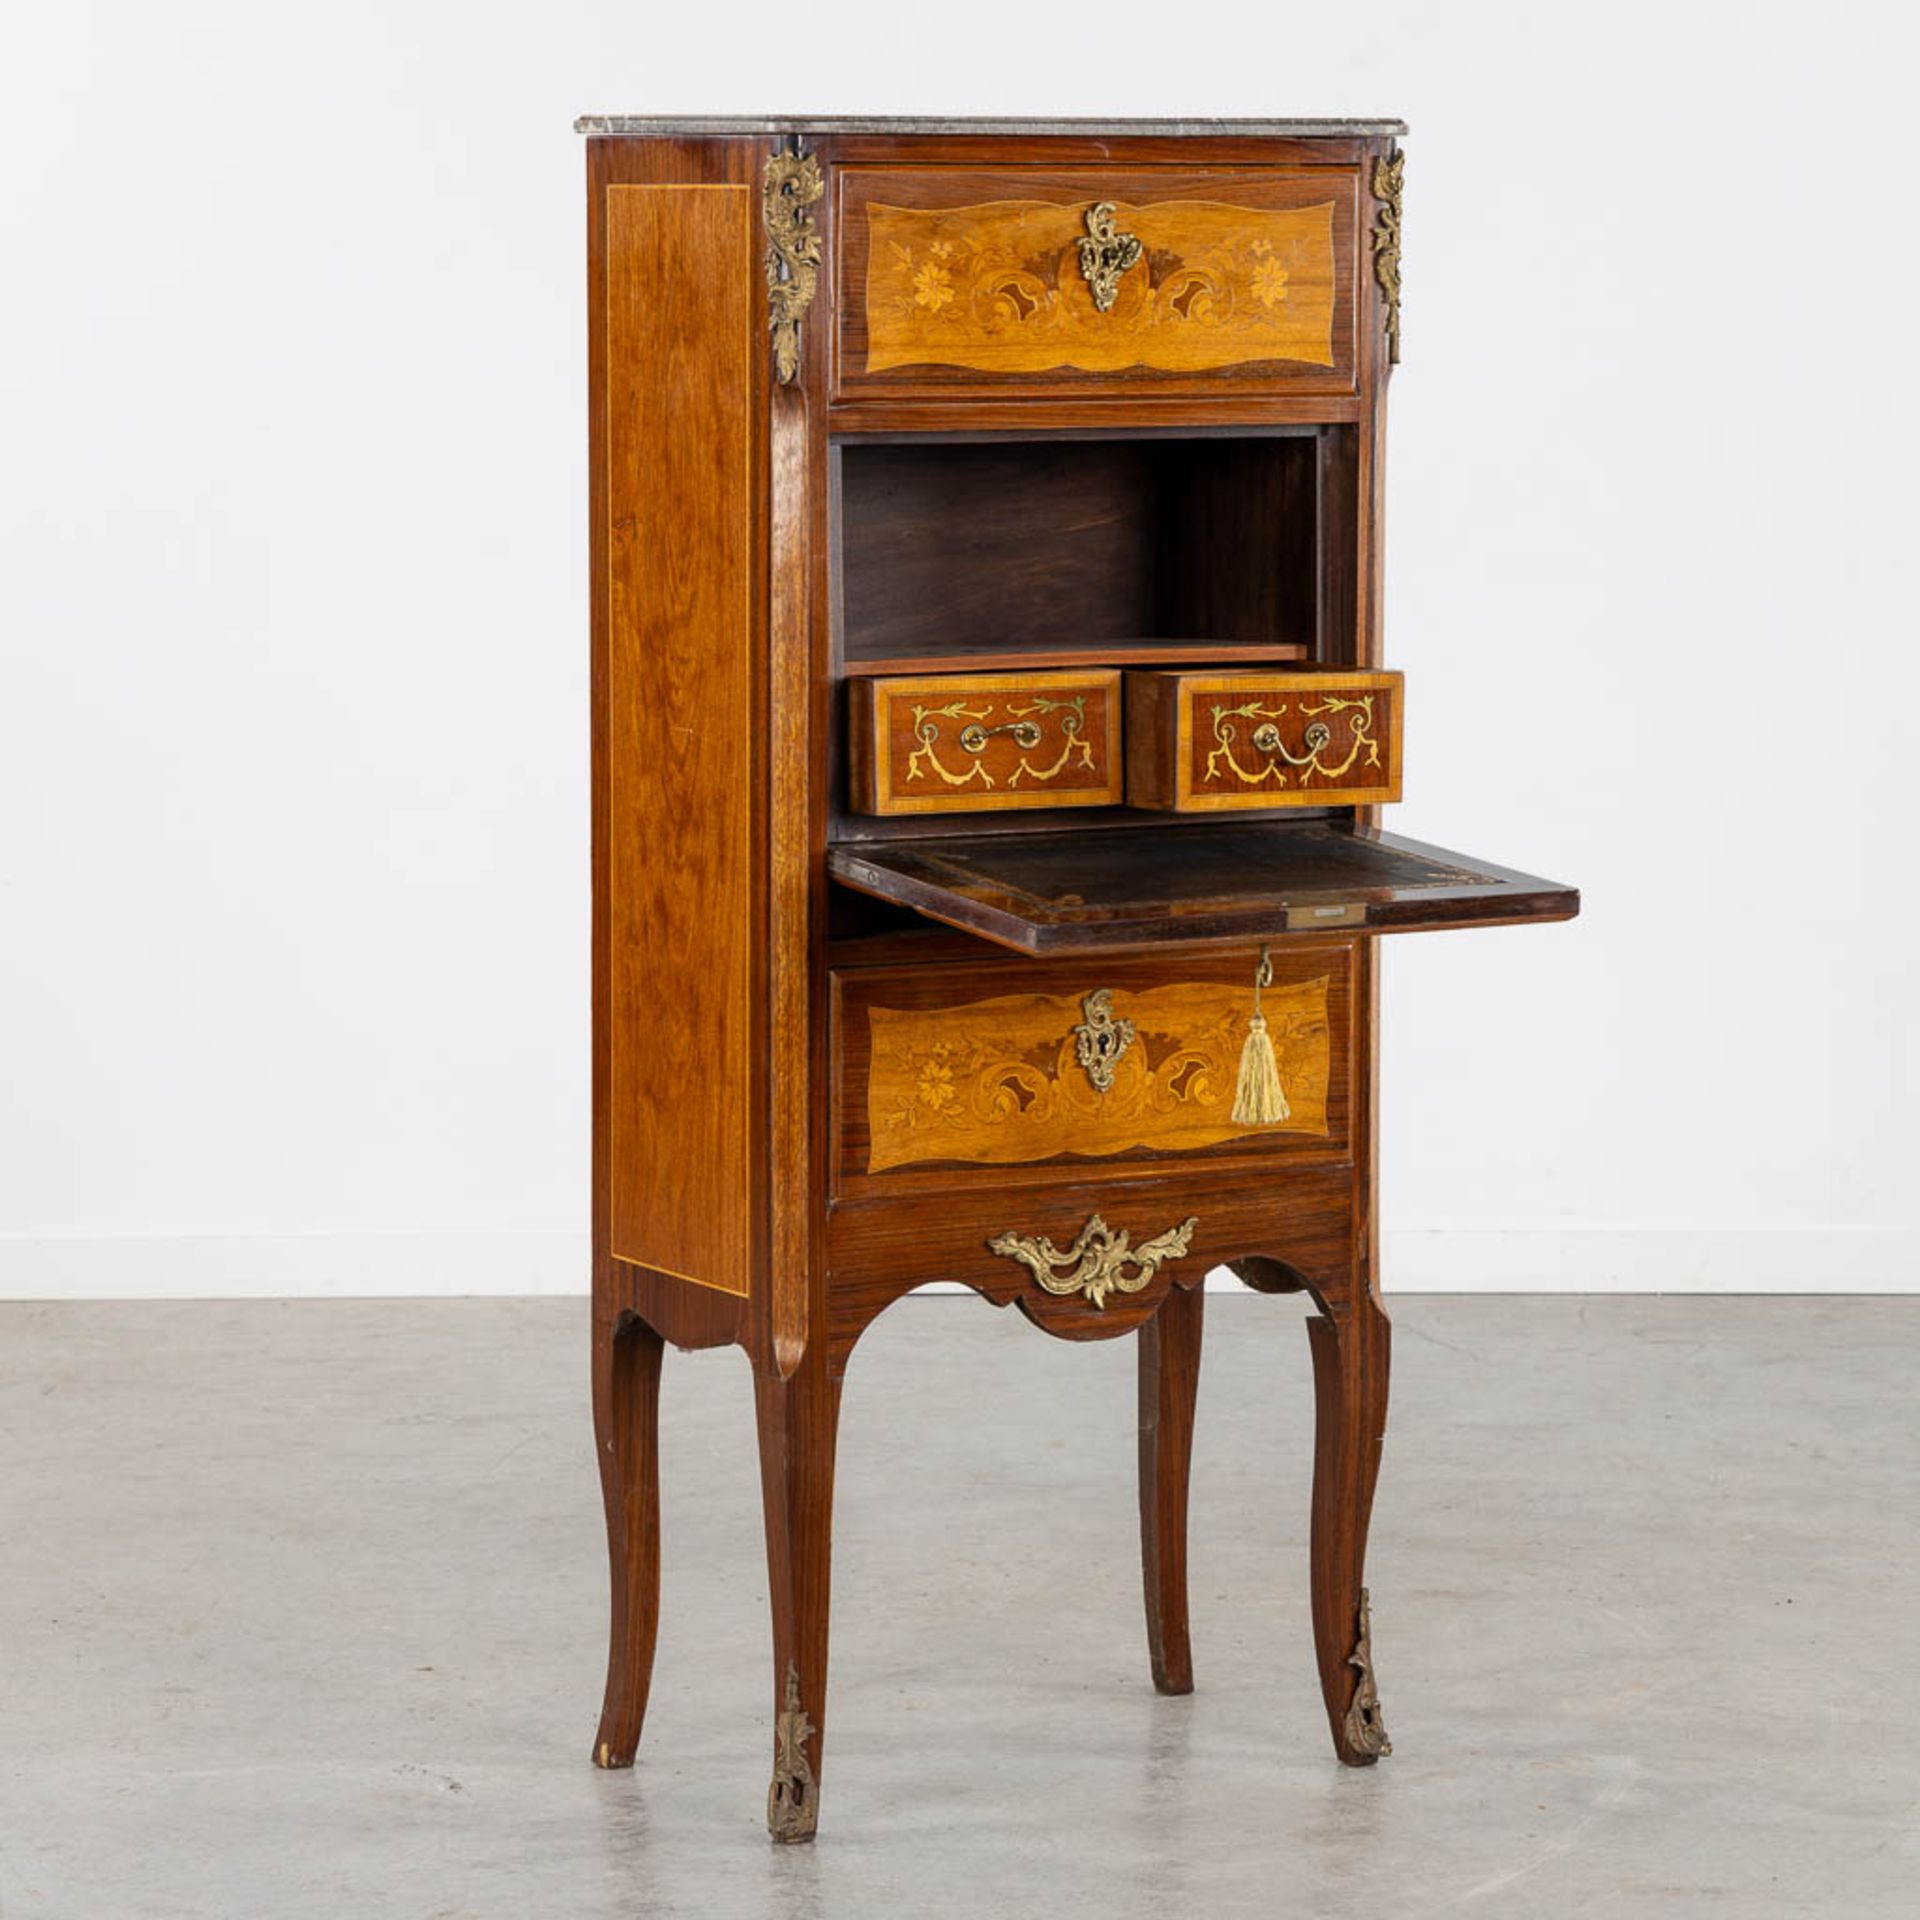 A Secretaire cabinet, Marquetry inlay and mounted with bronze. Circa 1900. (L:34 x W:56 x H:128 cm) - Bild 4 aus 15